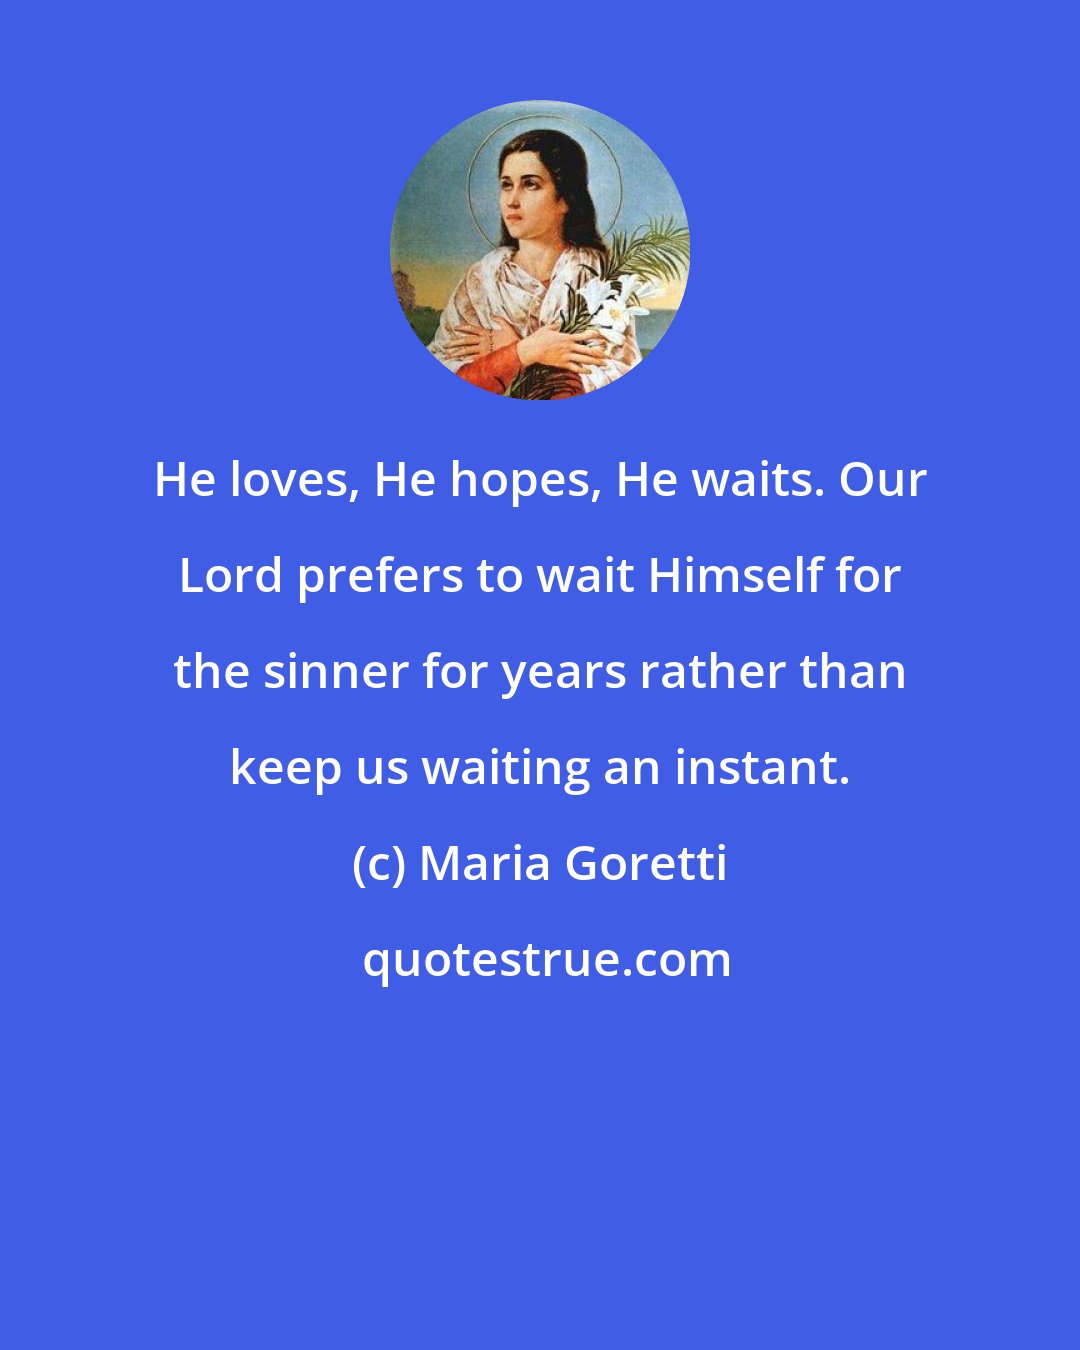 Maria Goretti: He loves, He hopes, He waits. Our Lord prefers to wait Himself for the sinner for years rather than keep us waiting an instant.